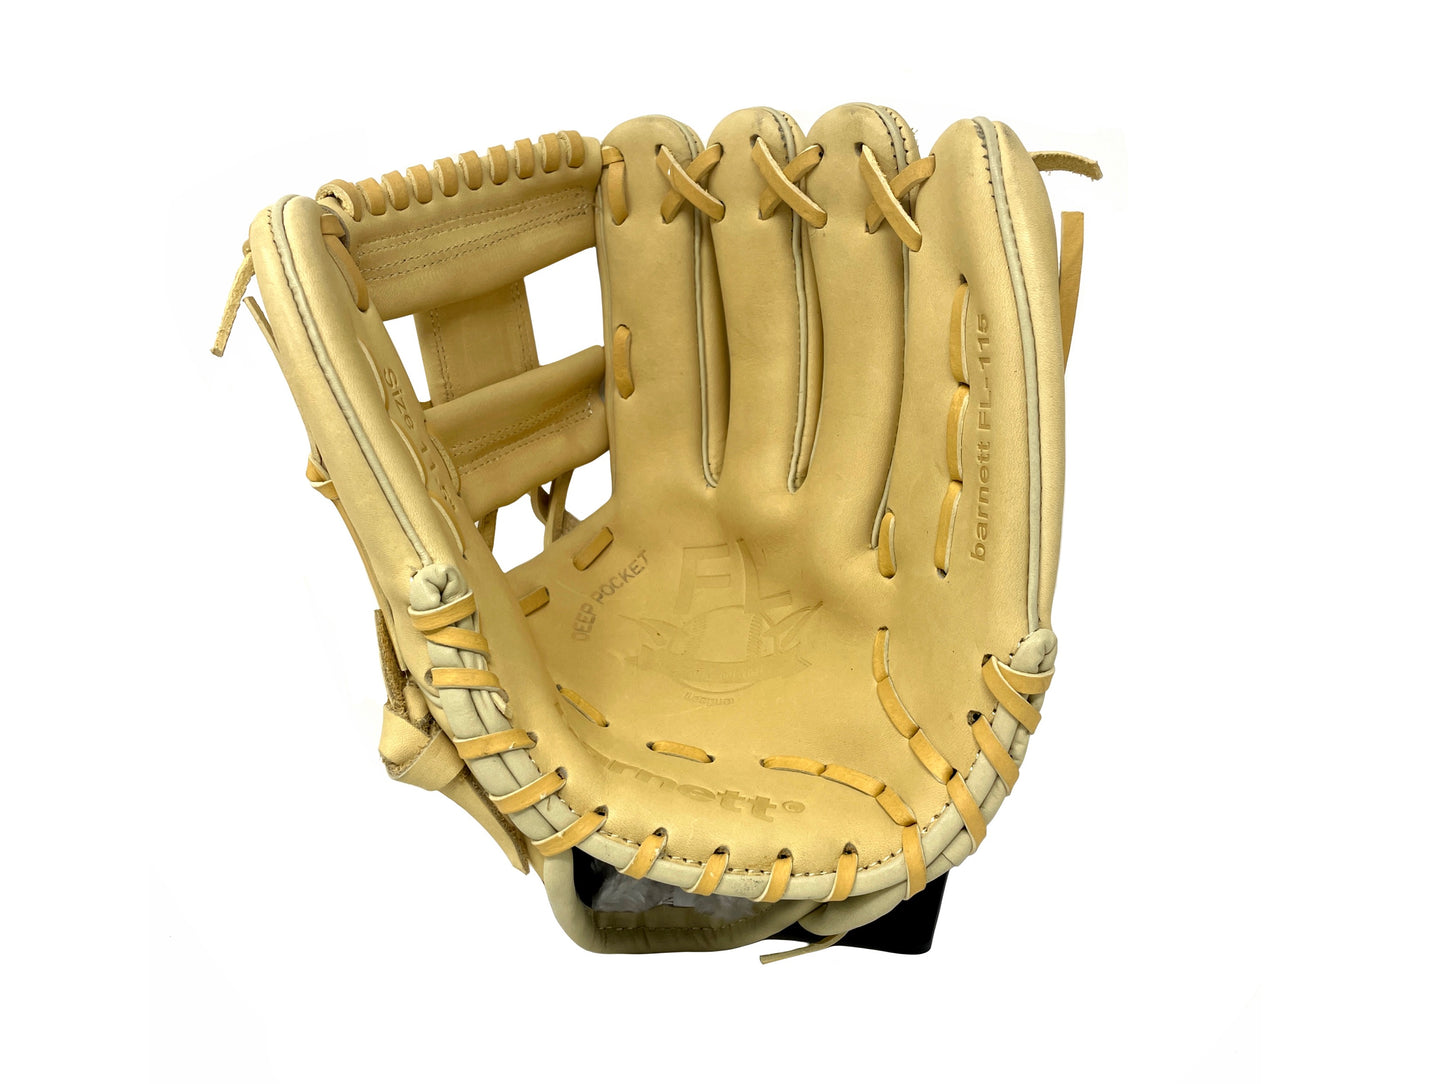 FL-115 Baseball glove, high quality, leather, infield/outfield 11.5", Beige